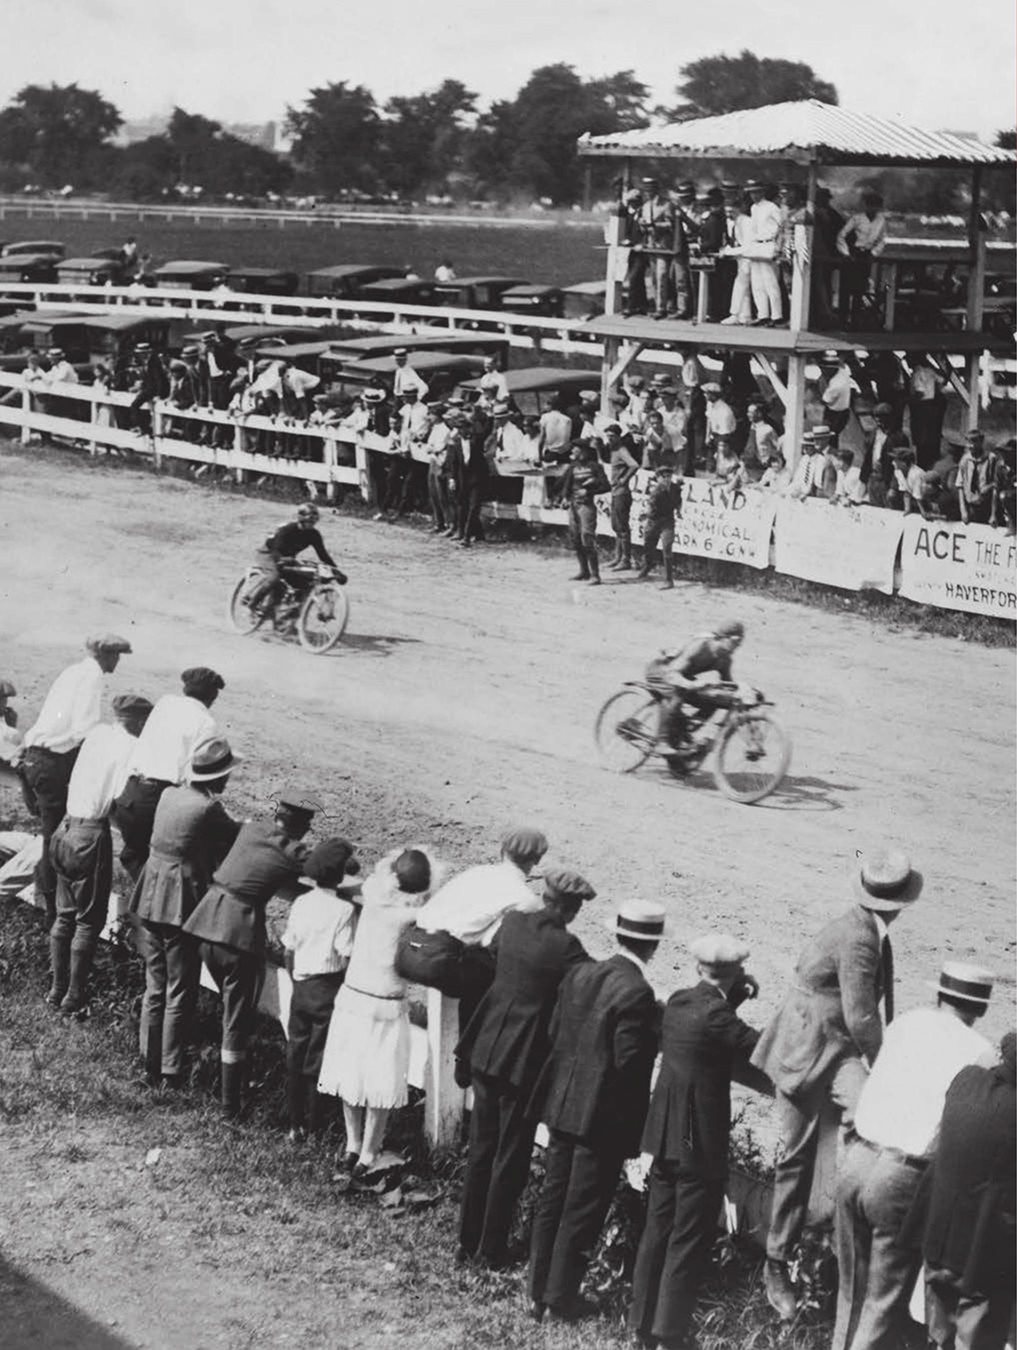 CHAPTER A crowd gathers to watch a motorcycle race in the 1920s CHOPPER - photo 11